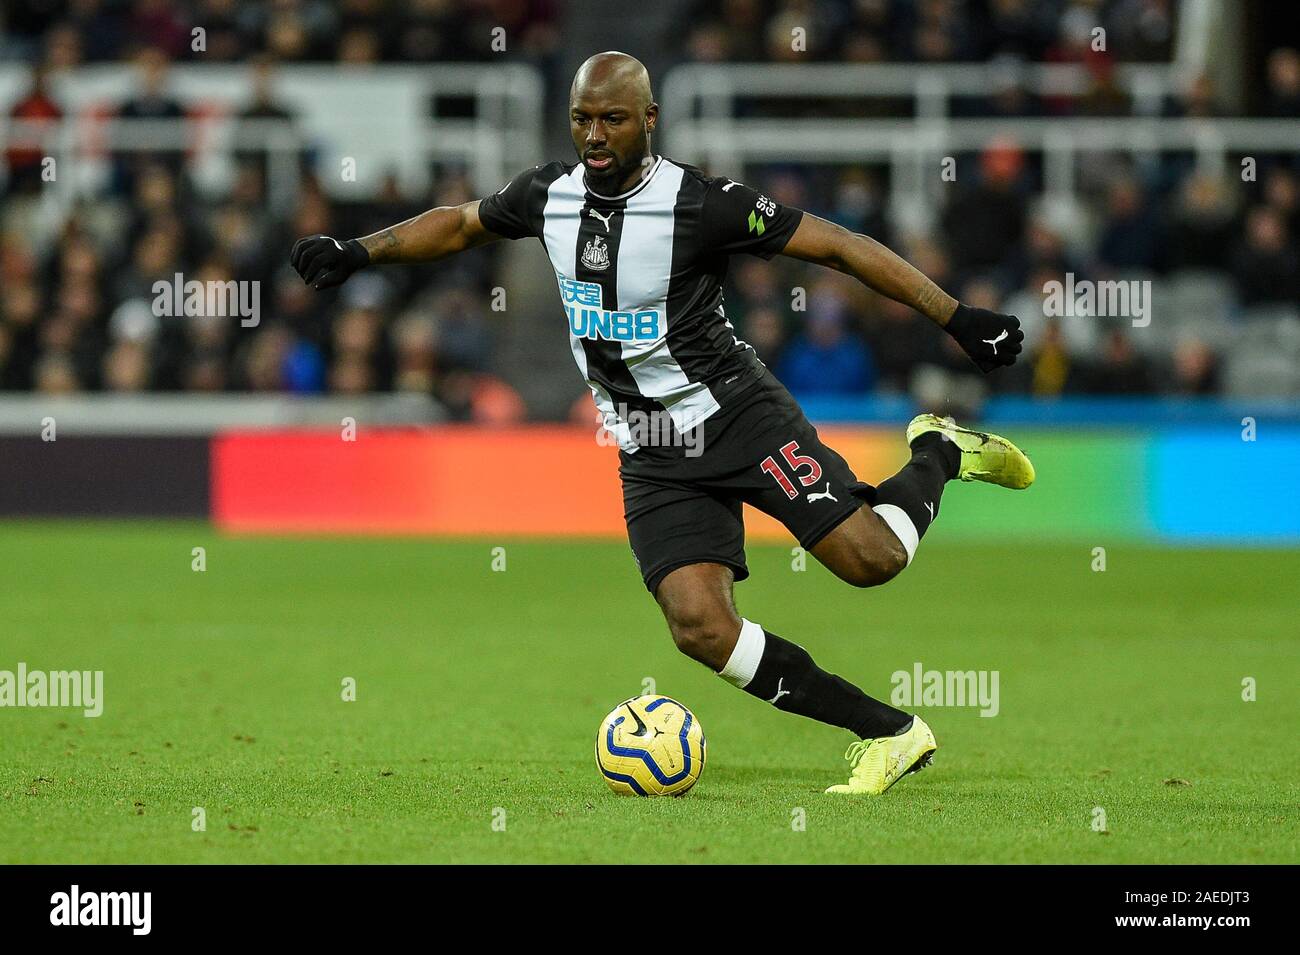 8th December 2019, St. James's Park, Newcastle, England; Premier League, Newcastle United v Southampton : Jetro Willems (15) of Newcastle United in action Credit: Iam Burn/News Images Stock Photo